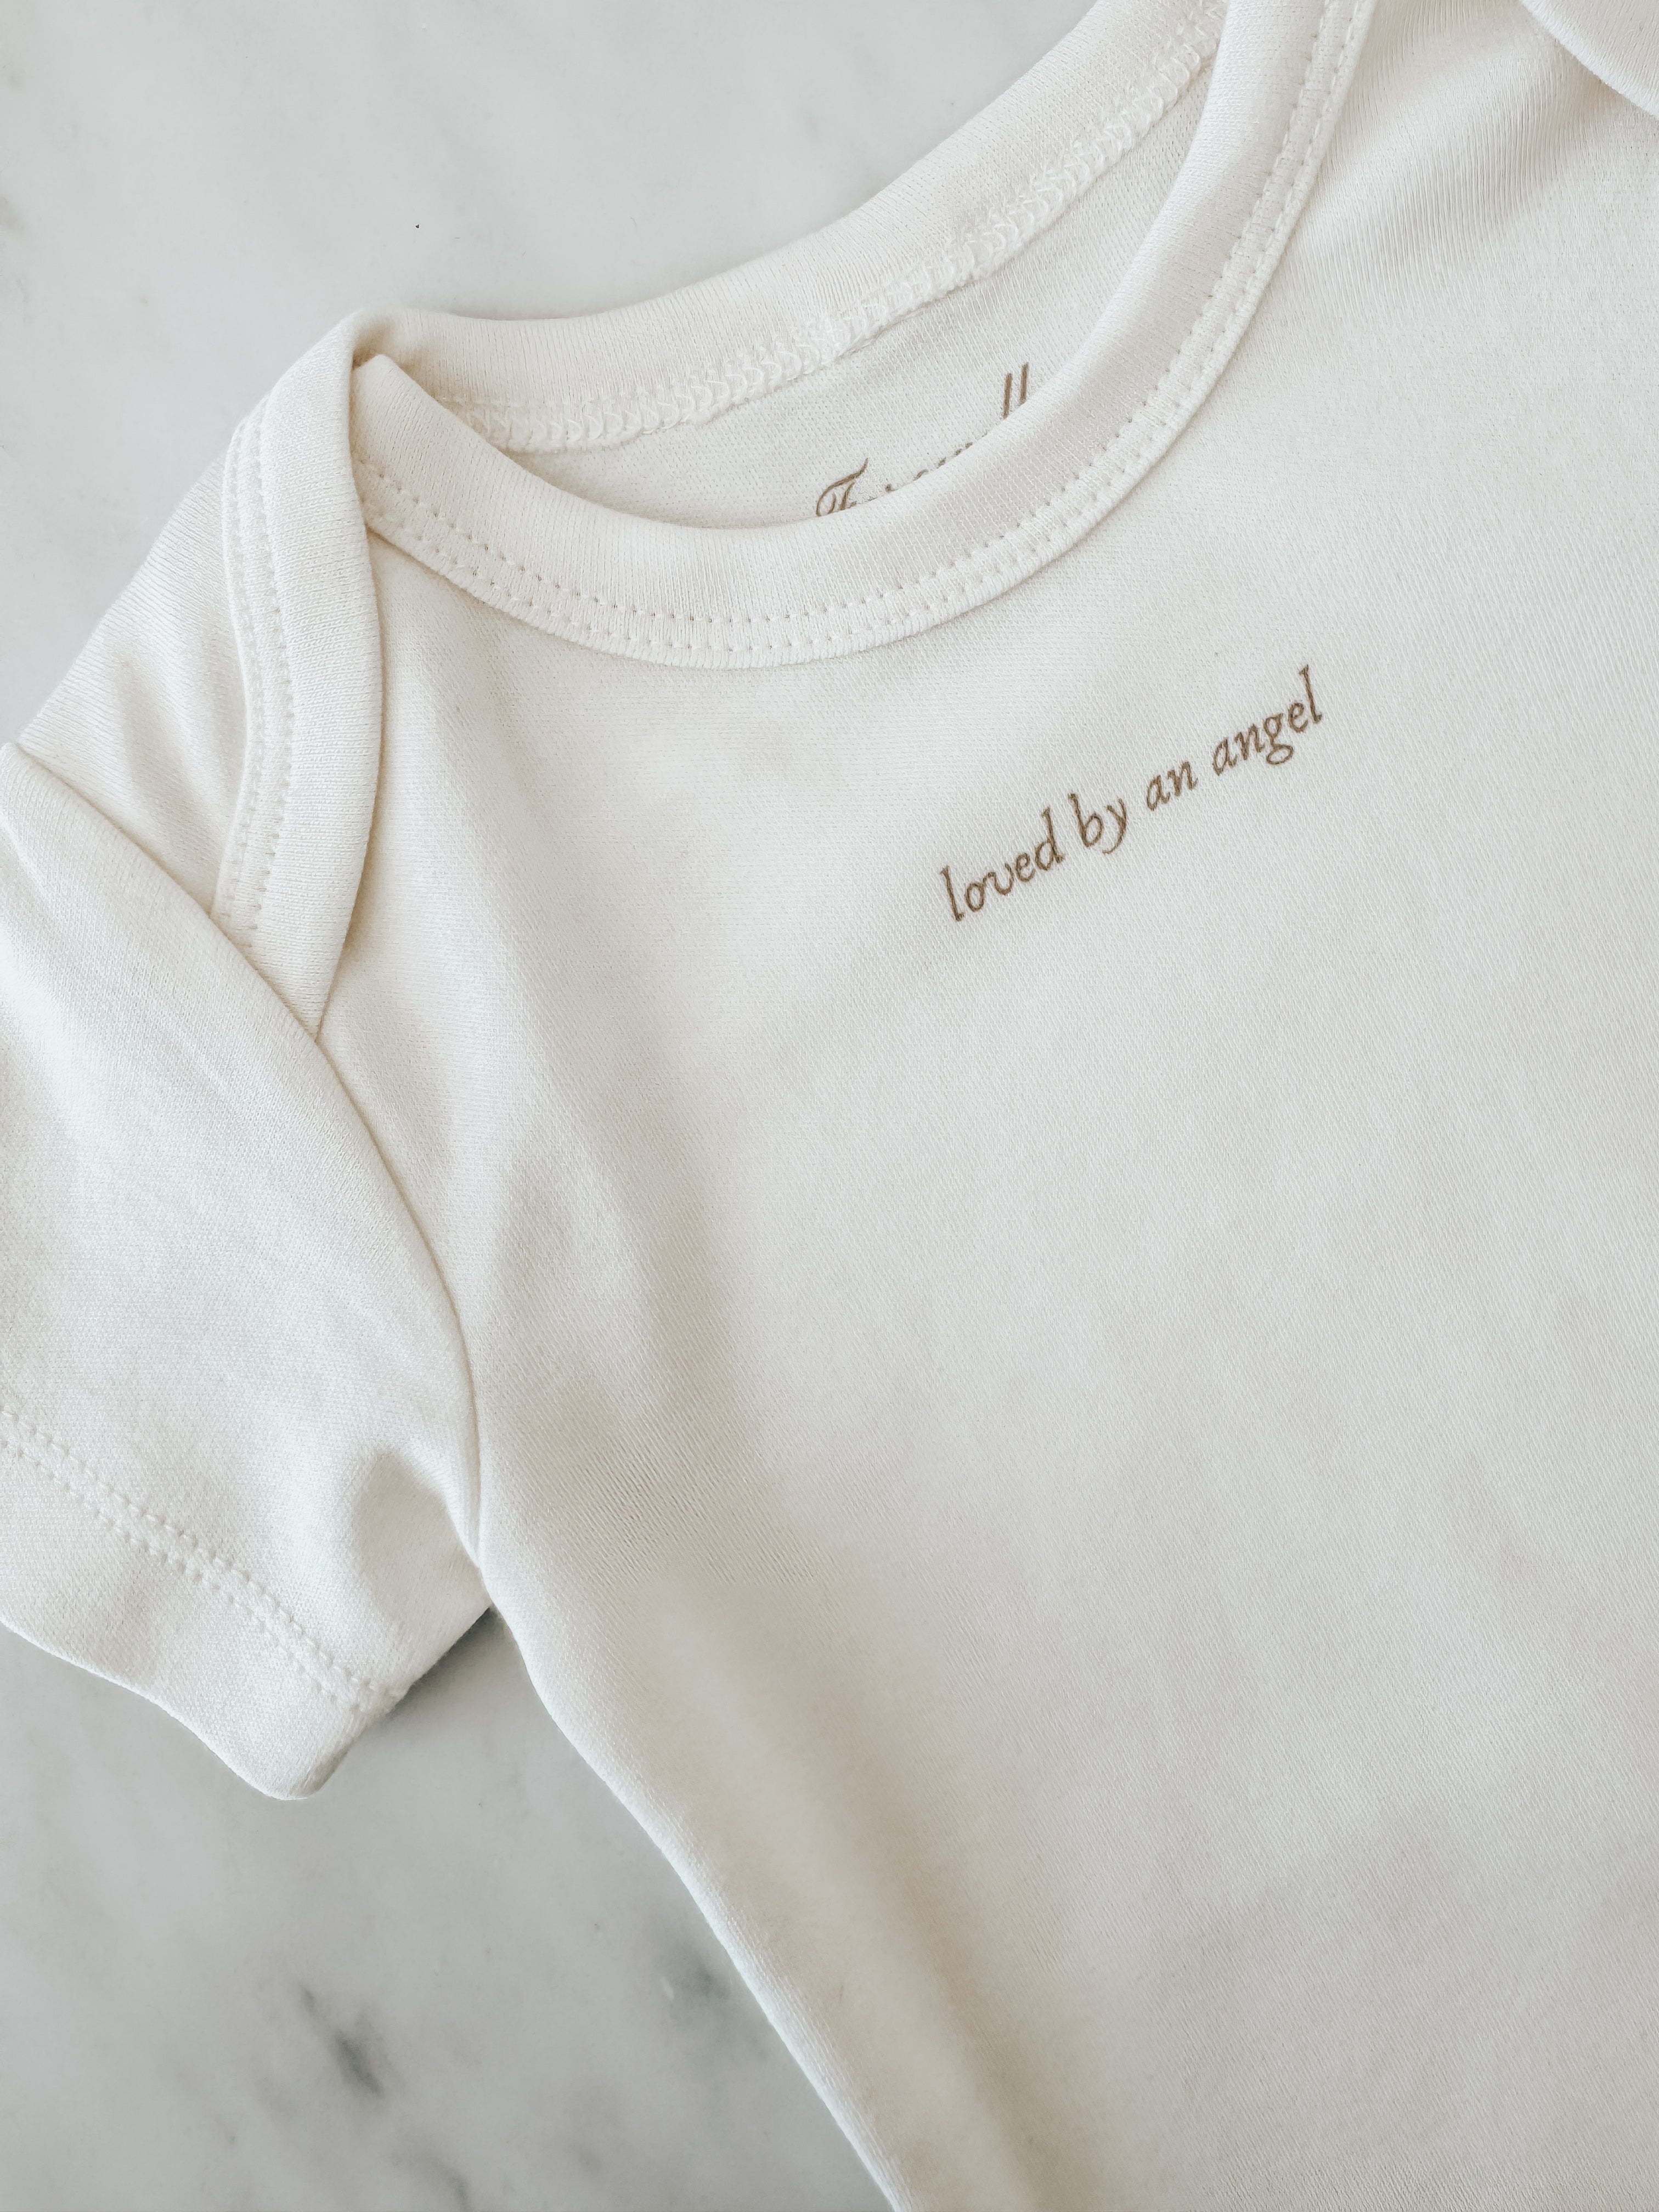 Classic Short Sleeve Bodysuit | Loved By An Angel